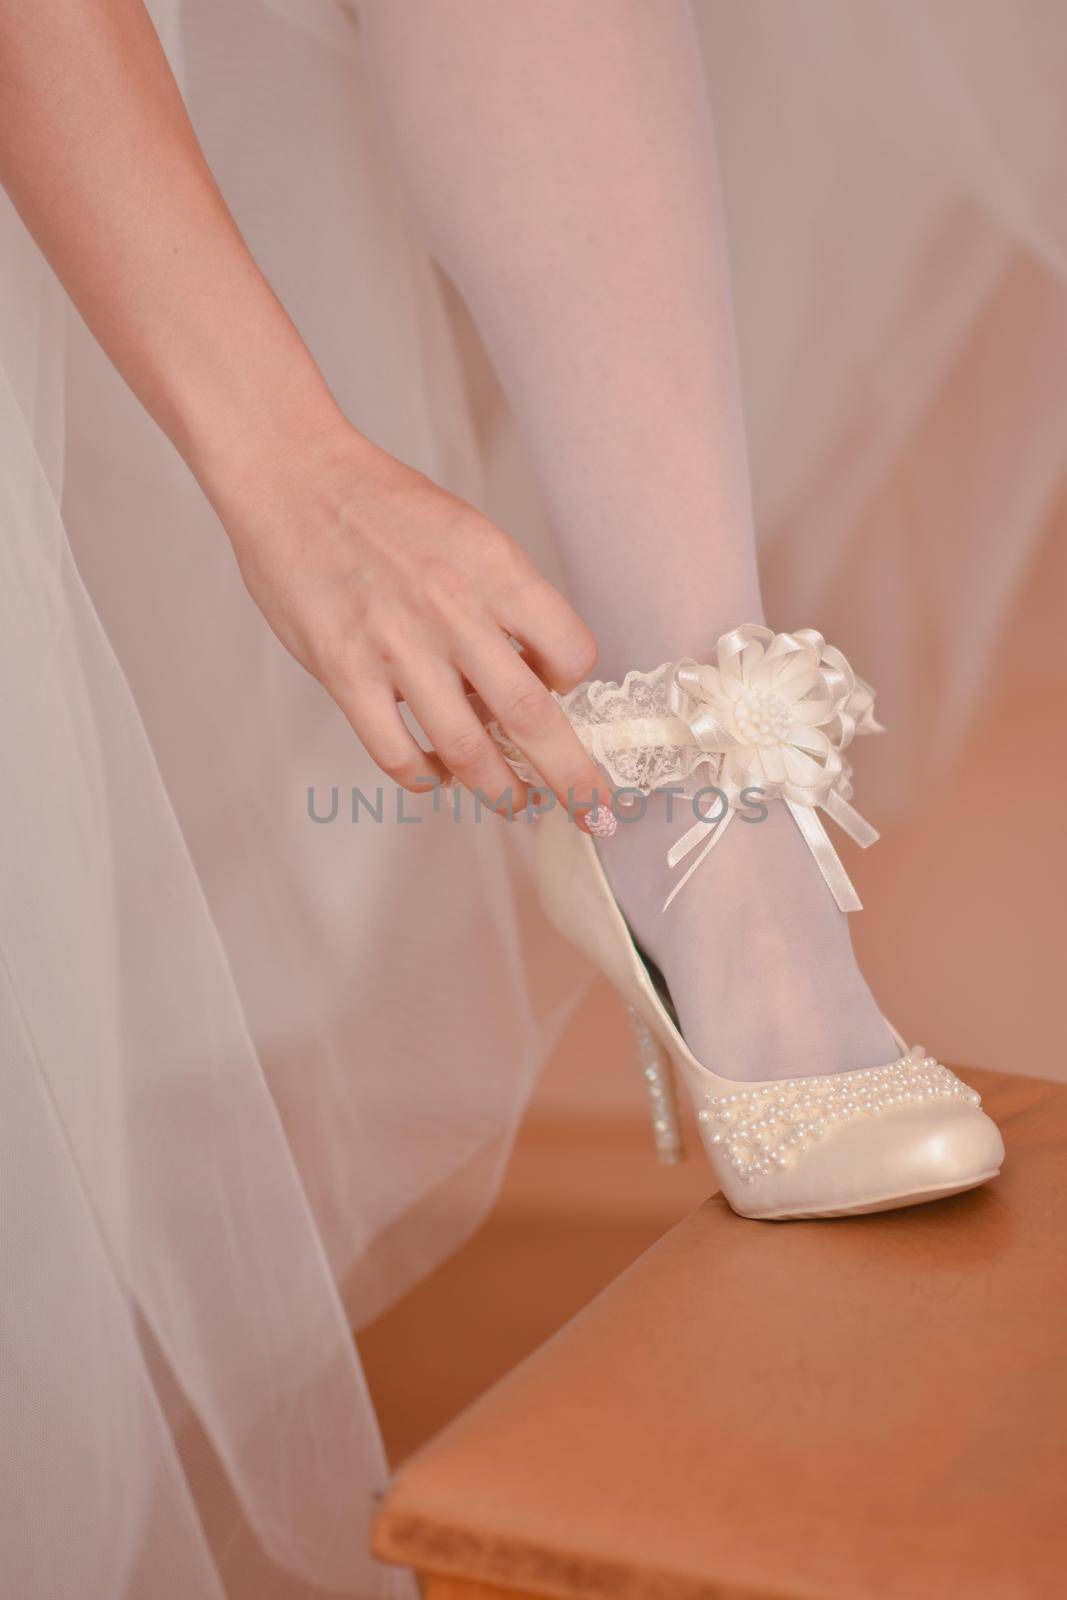 The bride puts a shoe on her foot in the morning before the wedding. Vertical photo